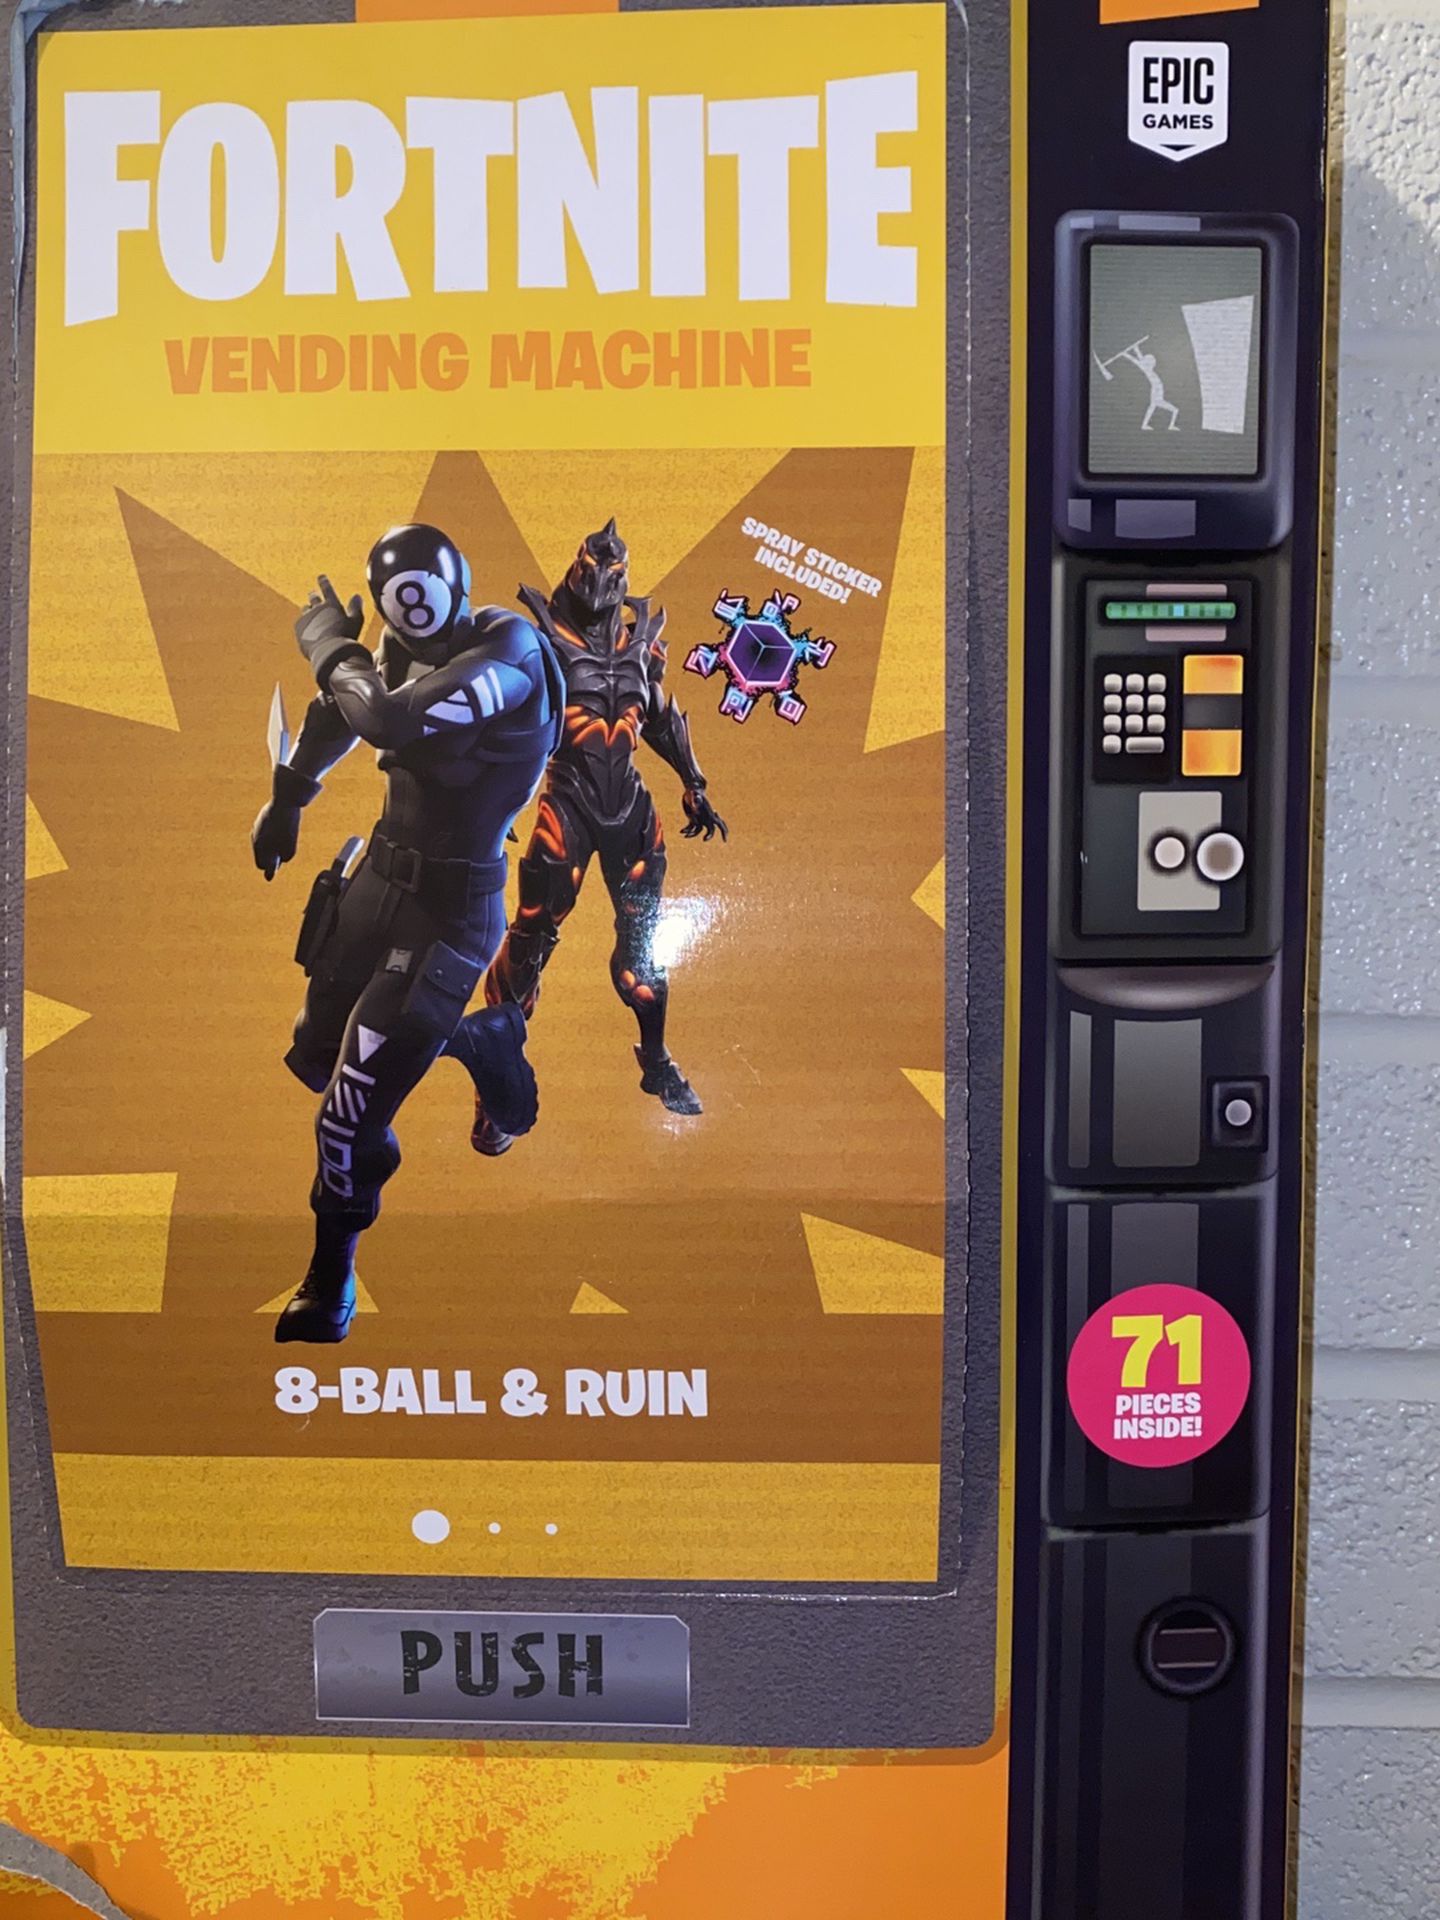 Fortnite Vending Machine 8-Ball & Ruin 71 Pieces Inside Box Has Damage And Open